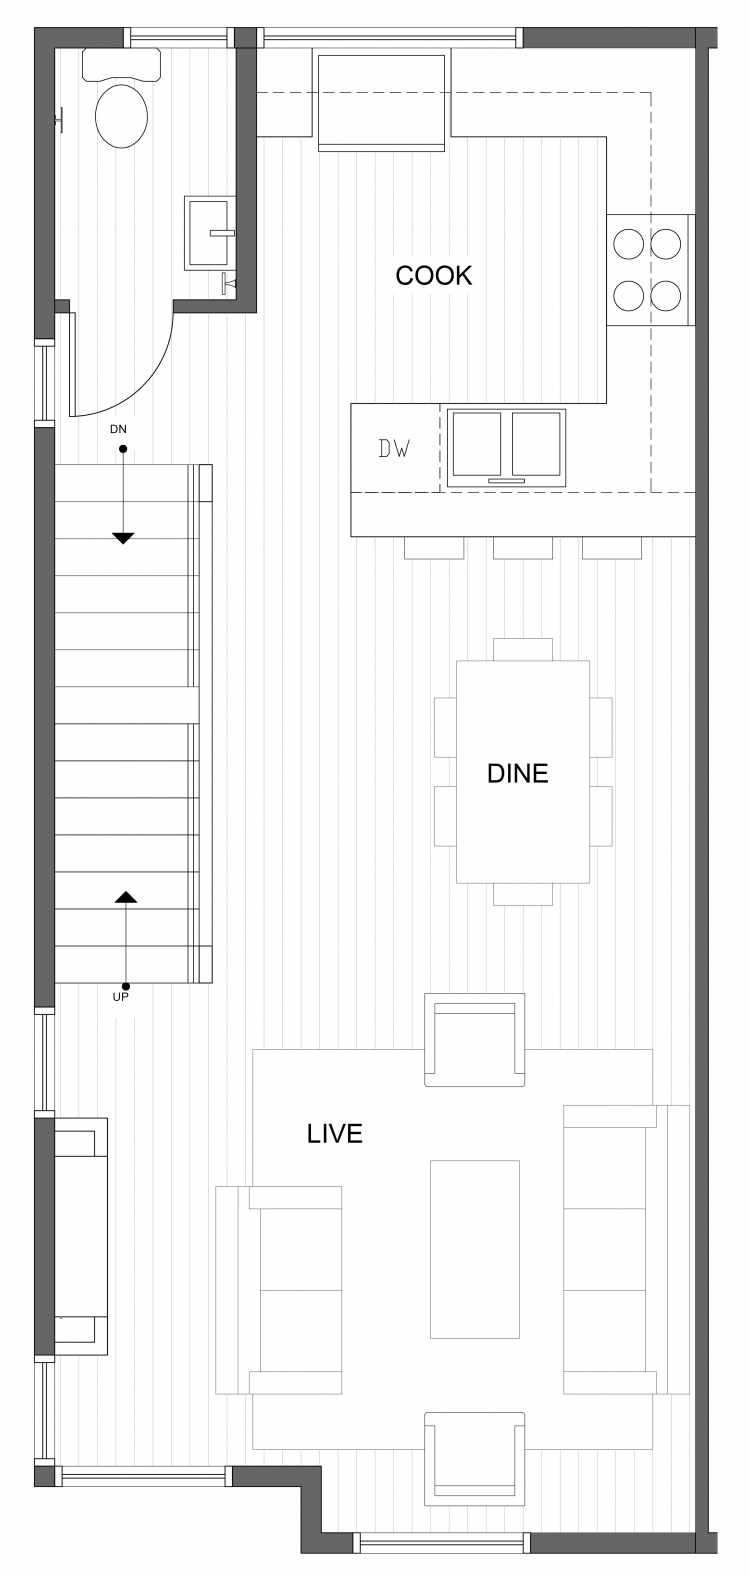 Second Floor Plan of 1030A NE 70th St, One of the Sopris on 70th Townhomes in Roosevelt